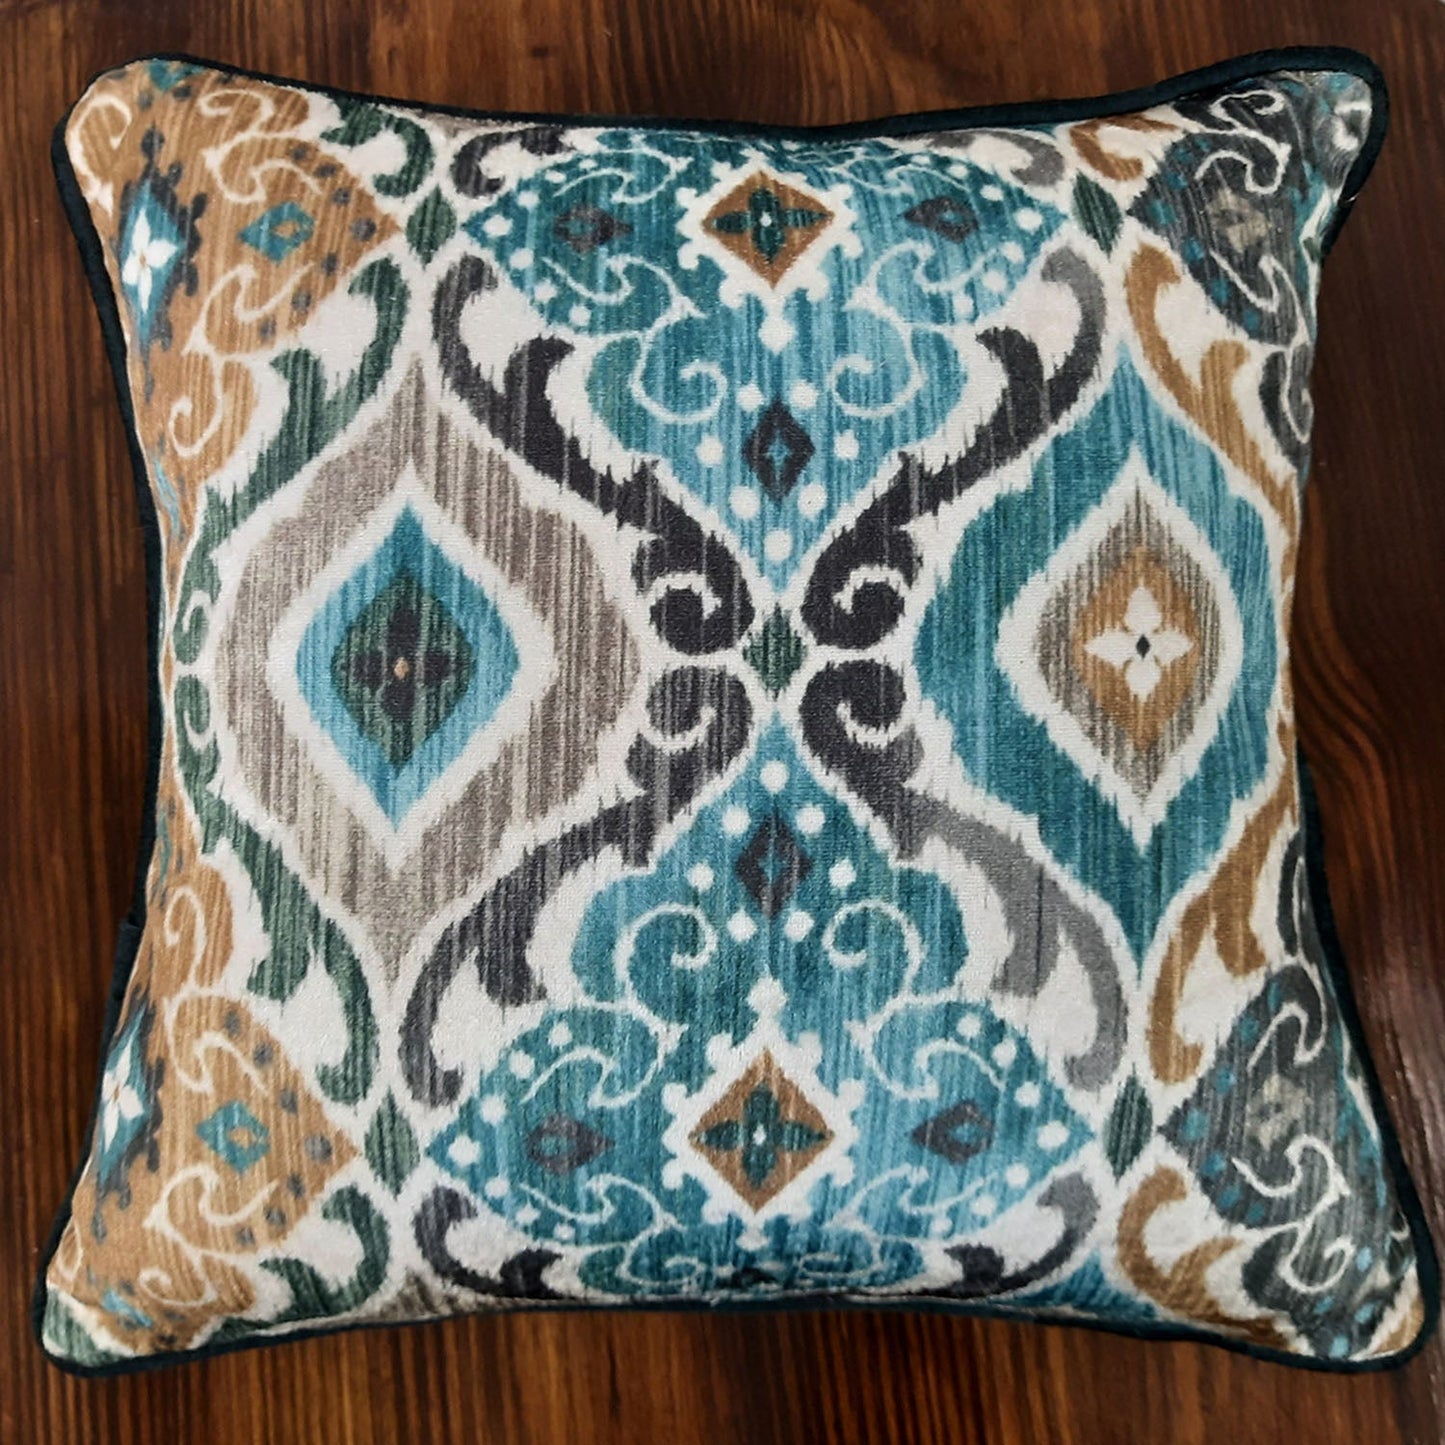 Cushion Cover  – Beautiful Traditional Design – Best Price 40cm x 40cm (~16″ x 16″)